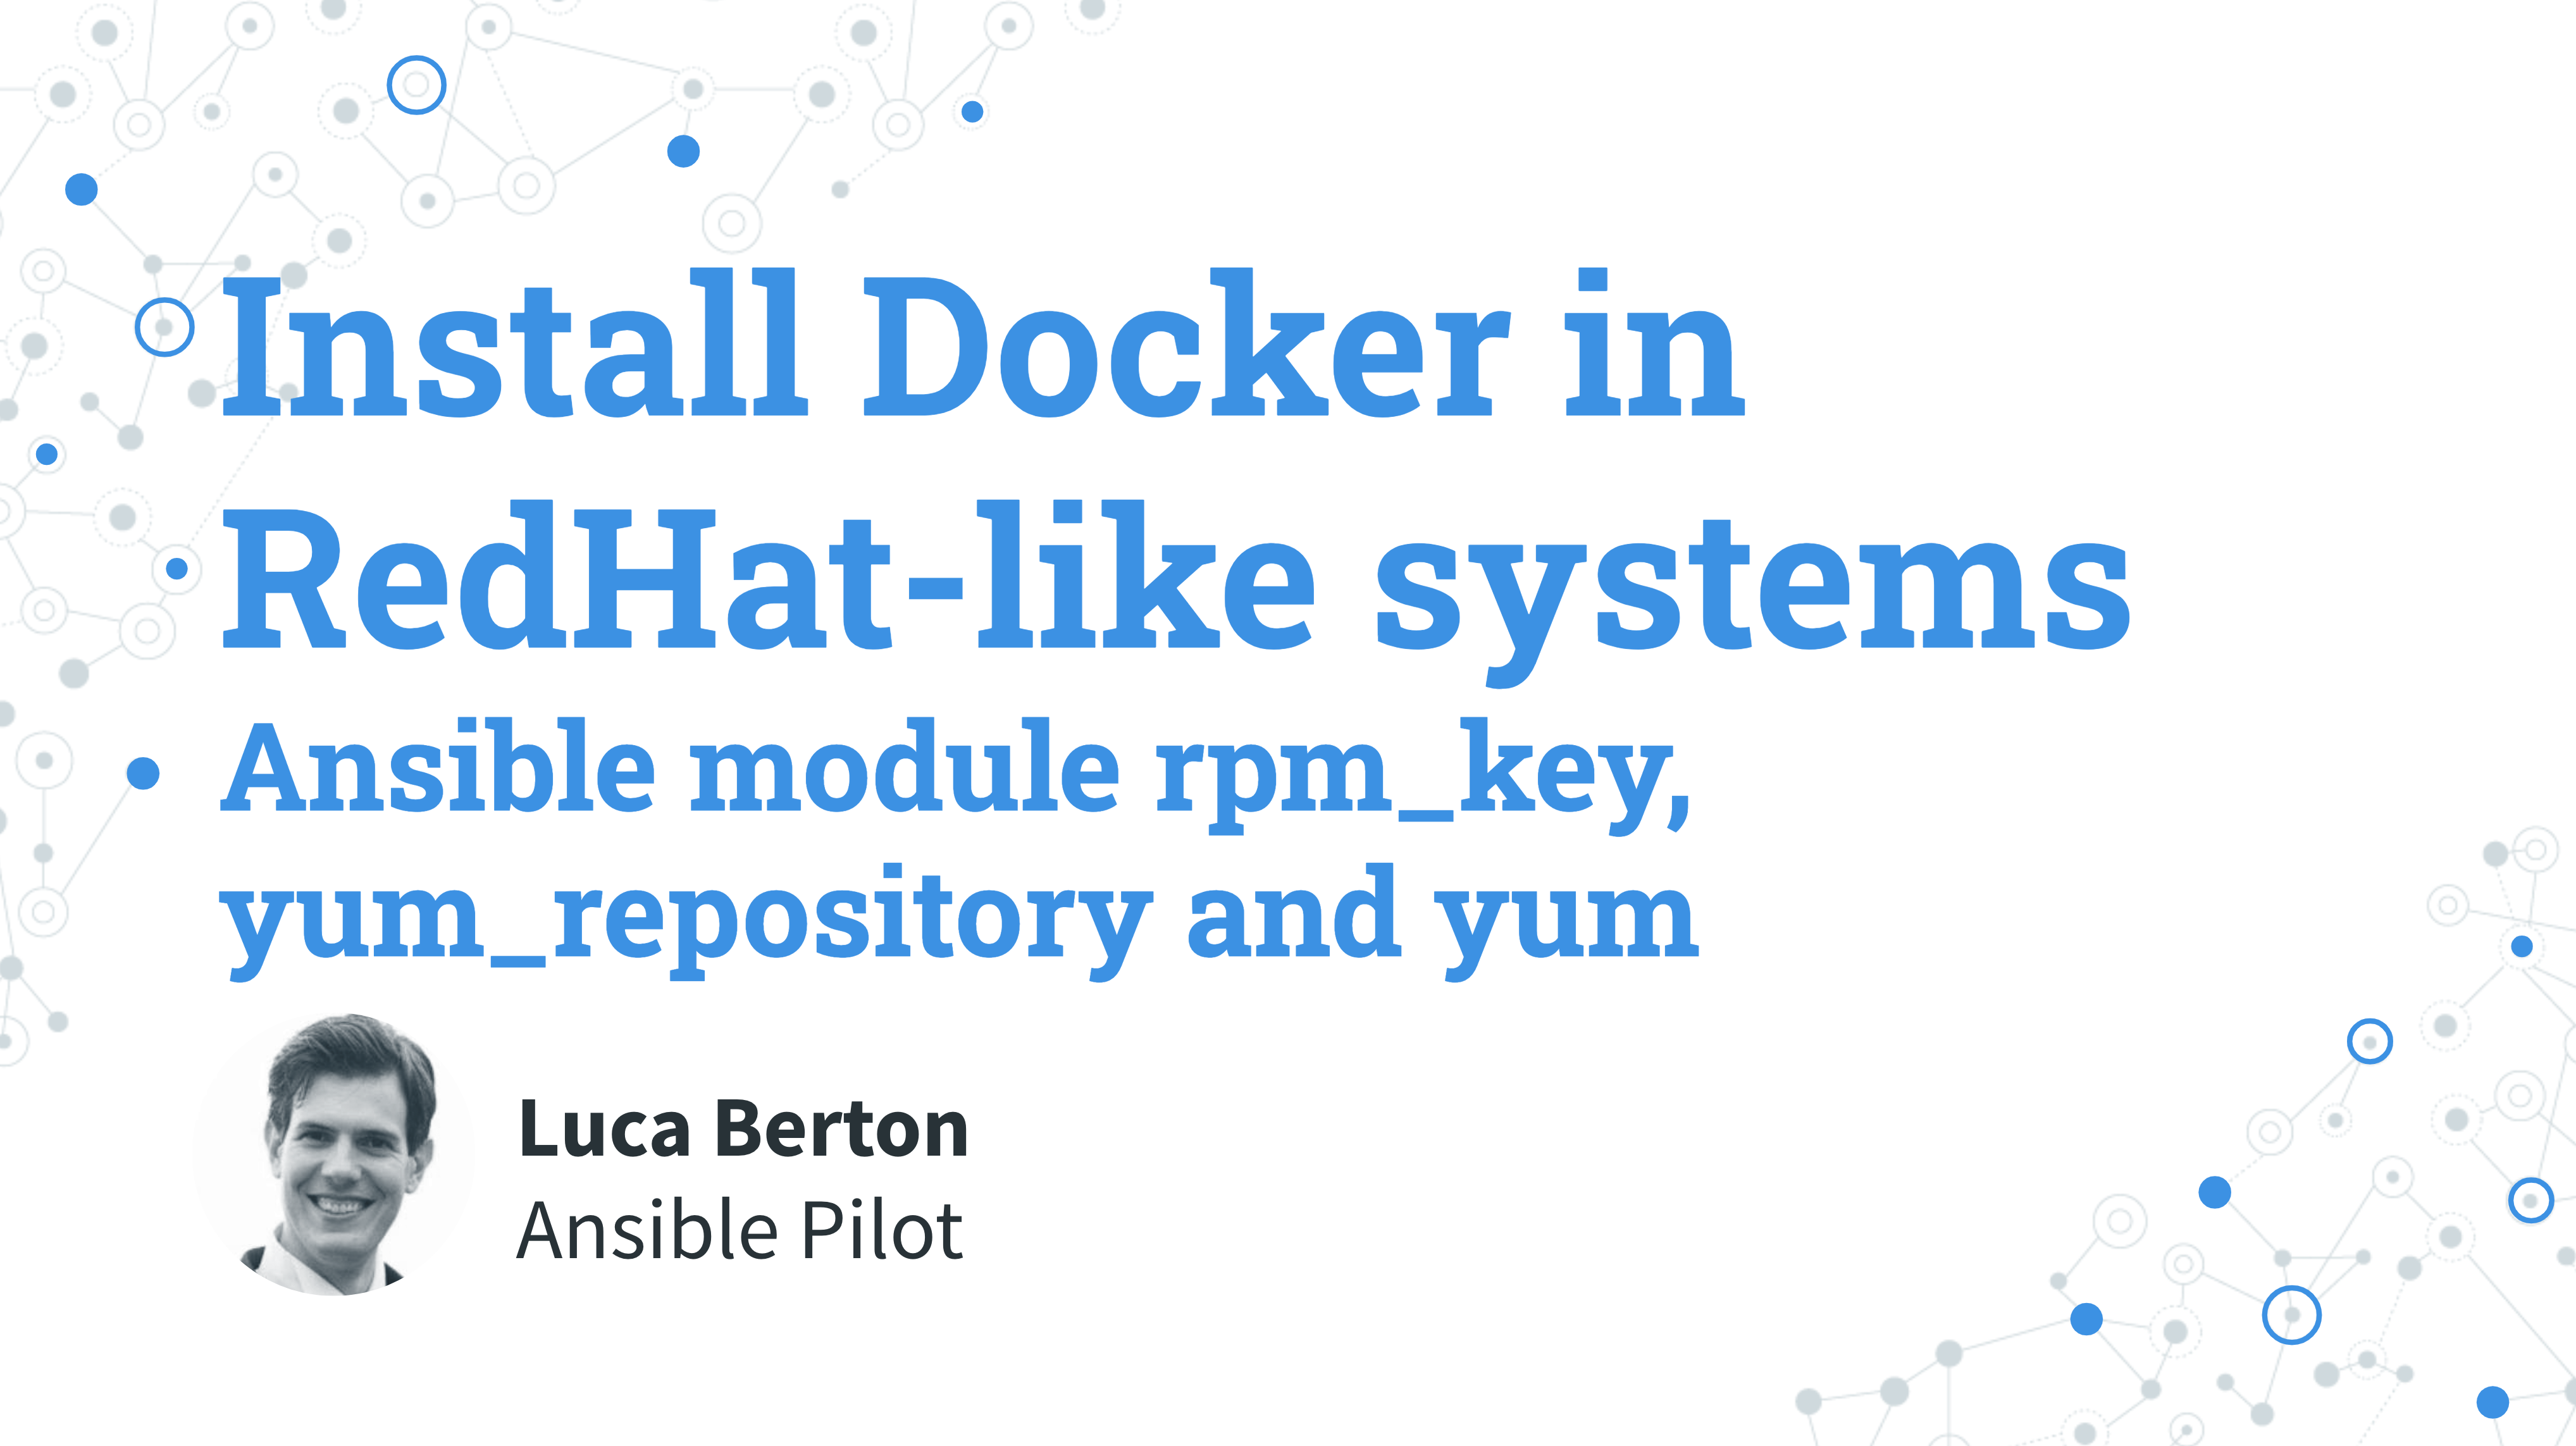 Install Docker in RedHat-like systems - Ansible module rpm_key, yum_repository and yum